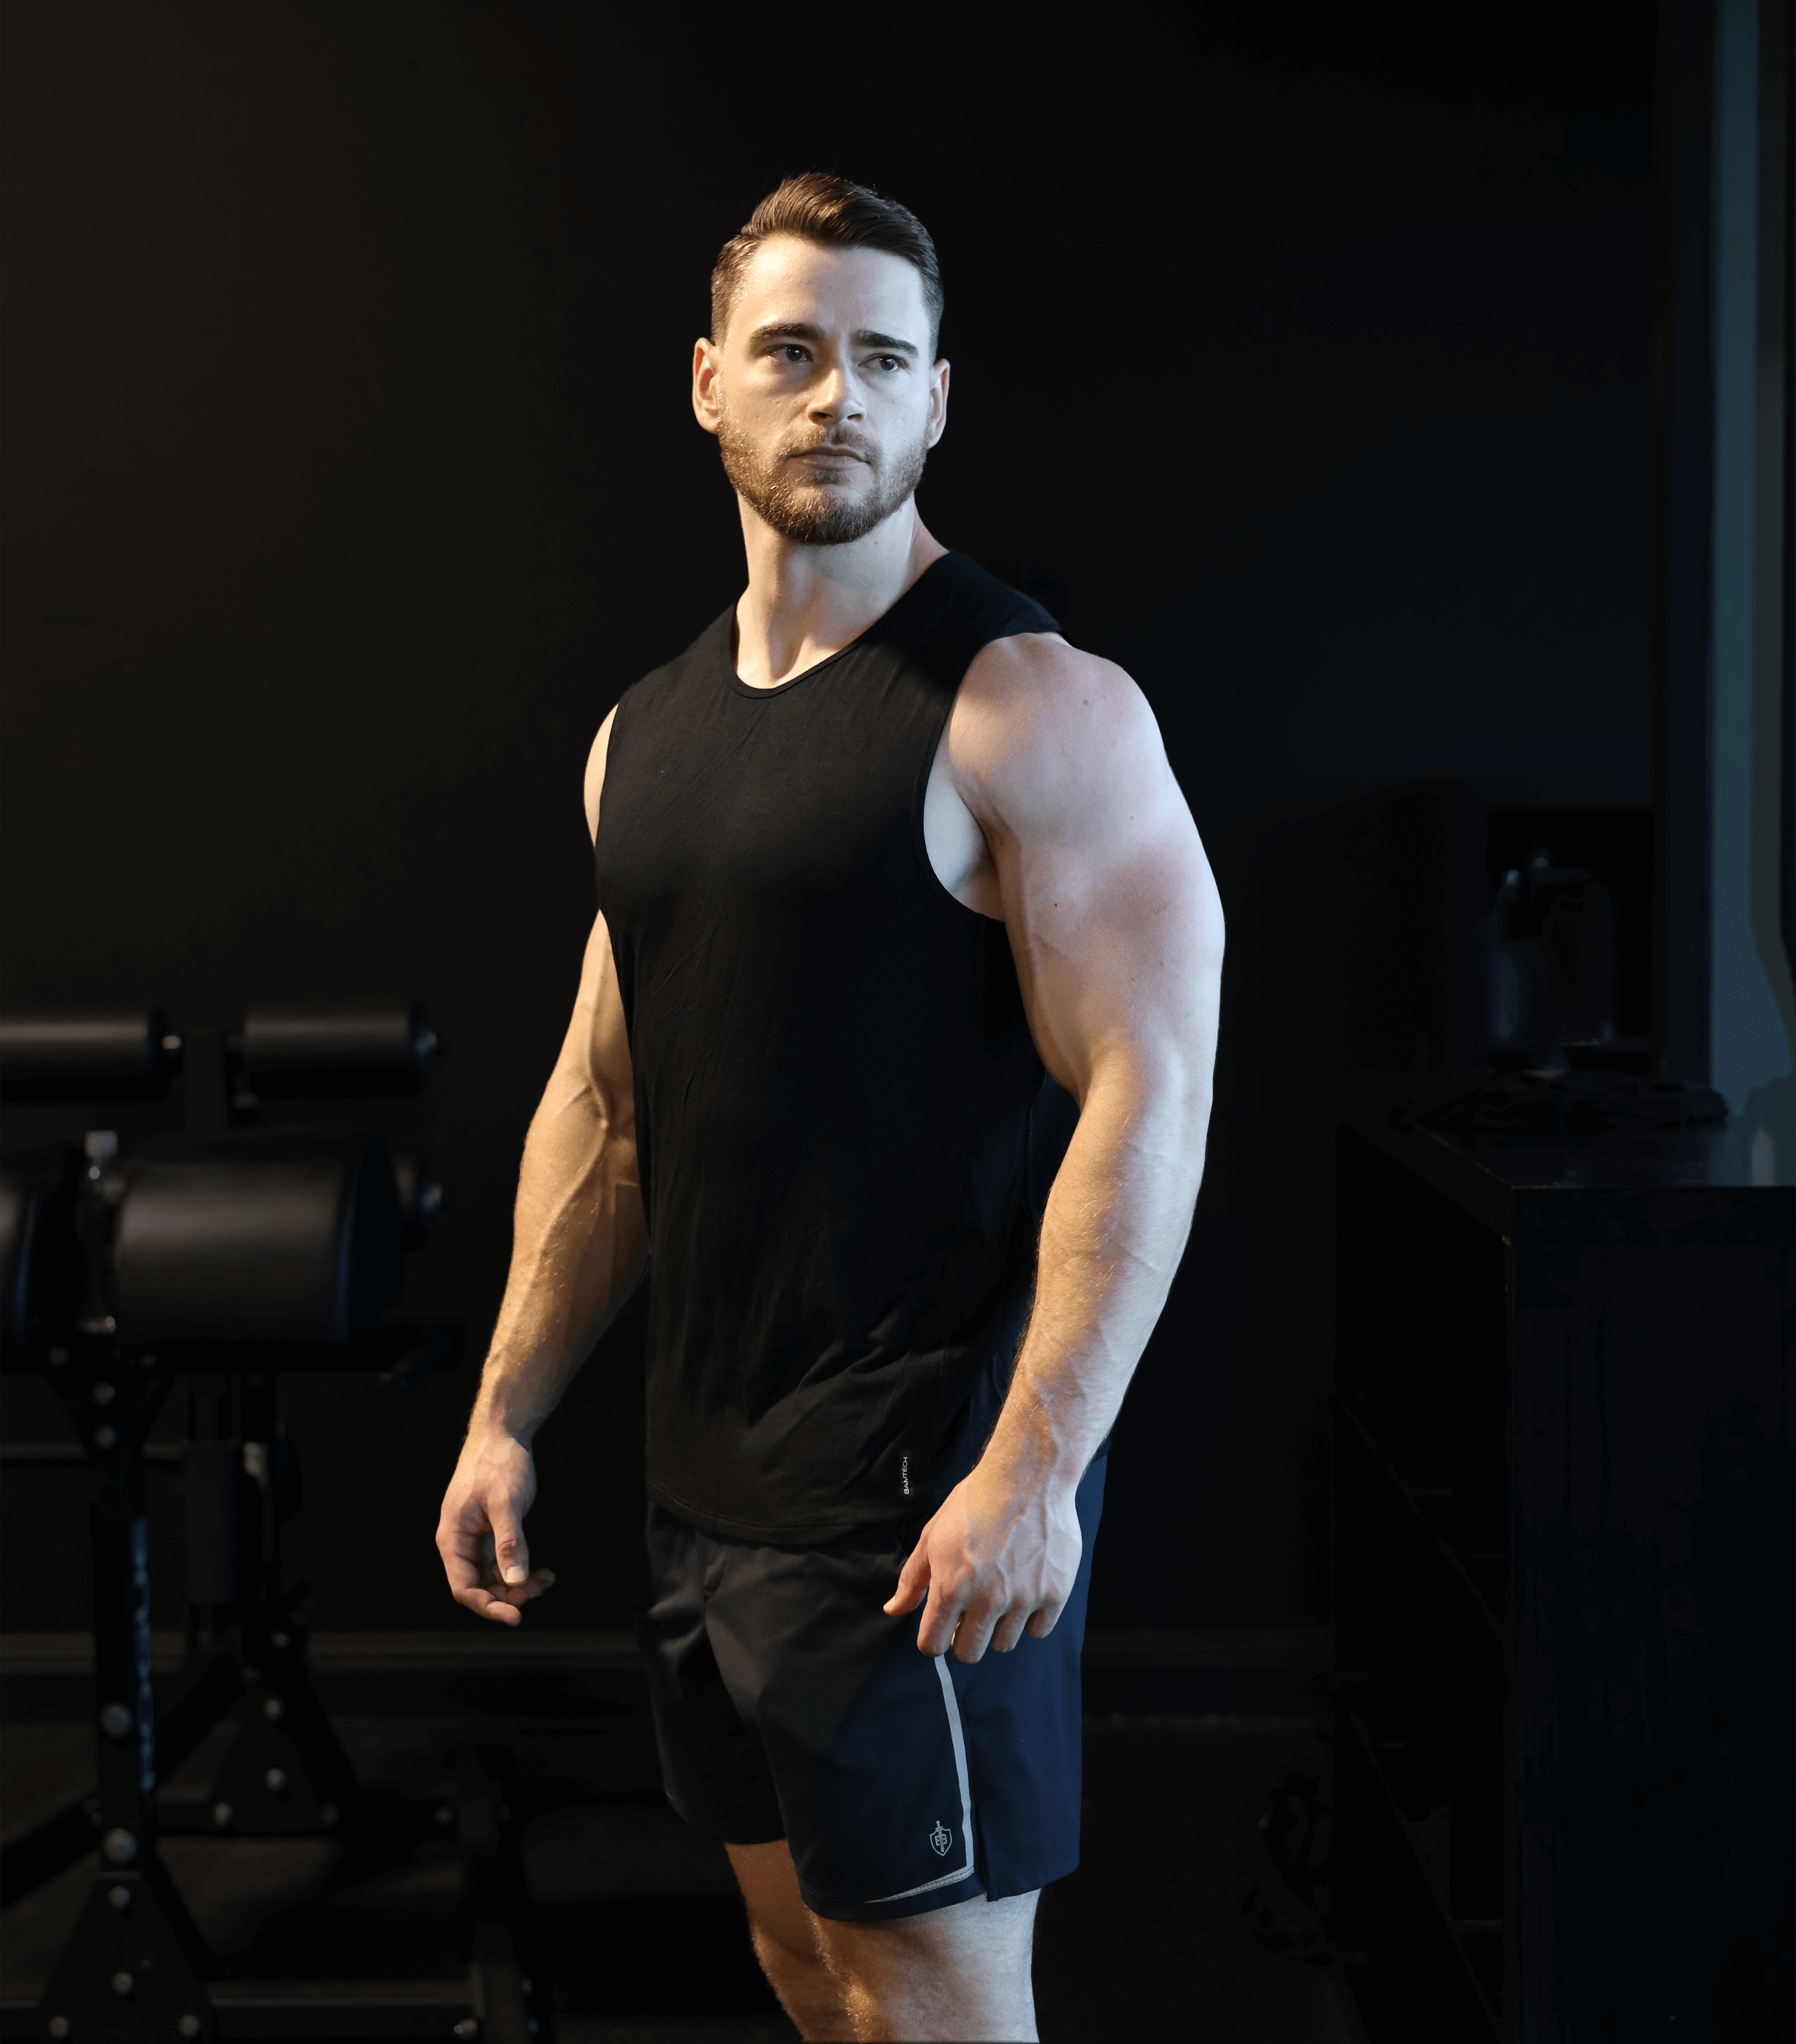 Bamtech Bamboo Aerotech Tank - A black tank top made from sustainable bamboo fabric, featuring a sleek and comfortable design. The tank offers breathability and moisture-wicking properties for optimal performance during workouts. The bamboo fabric provide